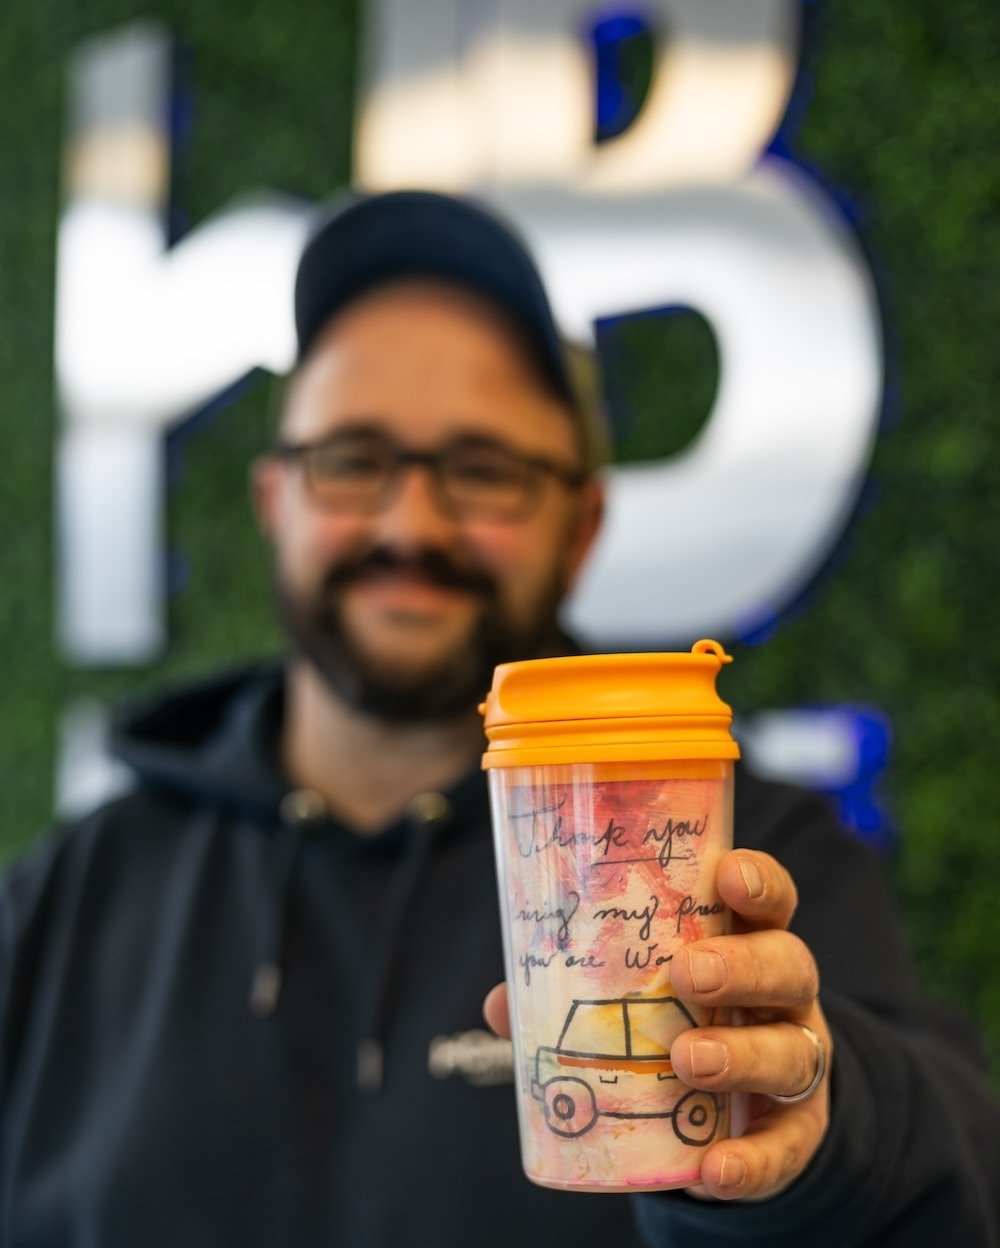 Why is Eddie's reusable cup so special? 💙 Keep reading 👇

Lilith, a young girl Eddie used to transport during his time at another company, and her mother, Erma, gifted him this sweet keepsake in 2020. Fast-forward a couple of years later and we wer